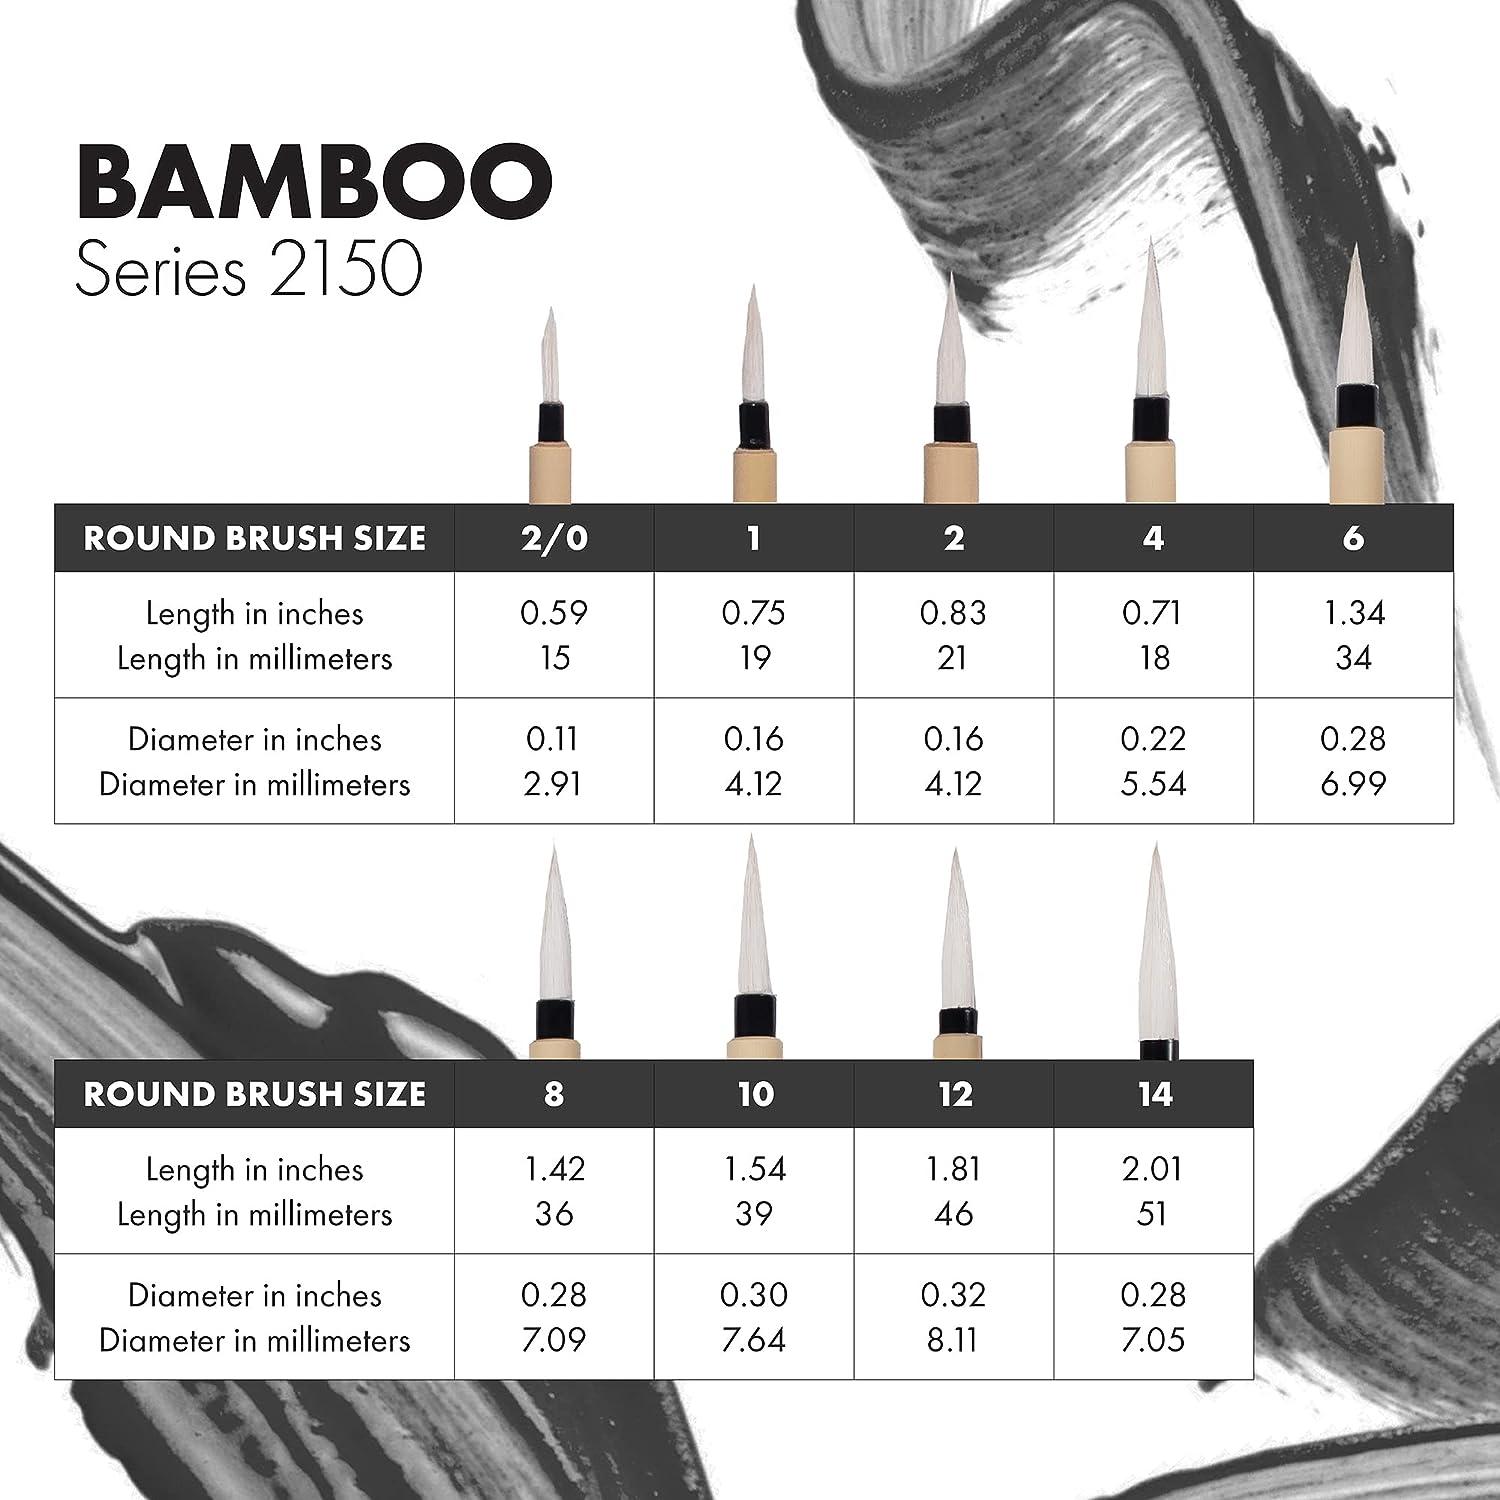 Princeton Artist Brush Co. Bamboo Series 2150 - Bamboo Painting Brush -  Short Handle Round Brush Size 8 - Natural Hair Calligraphy Brush for  Watercolor and Ink - Single Ink Brush for Sumi Painting